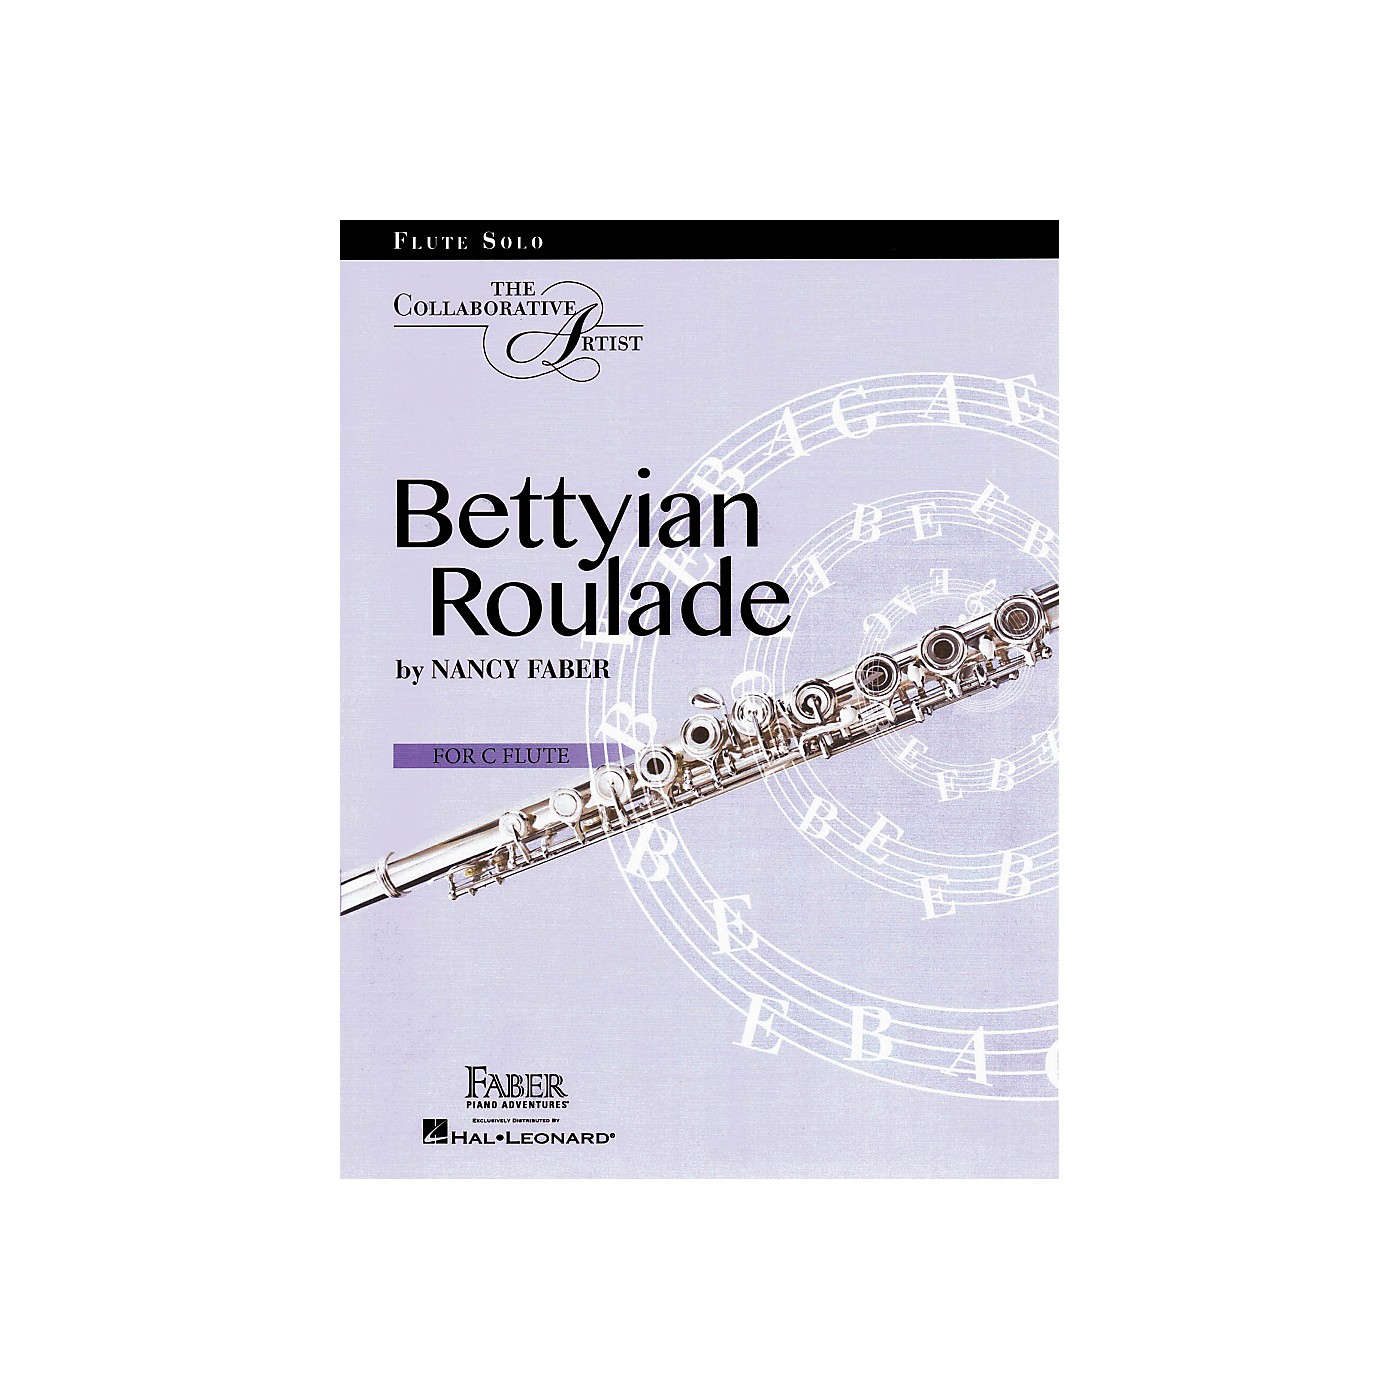 Faber Piano Adventures Bettyian Roulade Flute Solo By Nancy Faber thumbnail